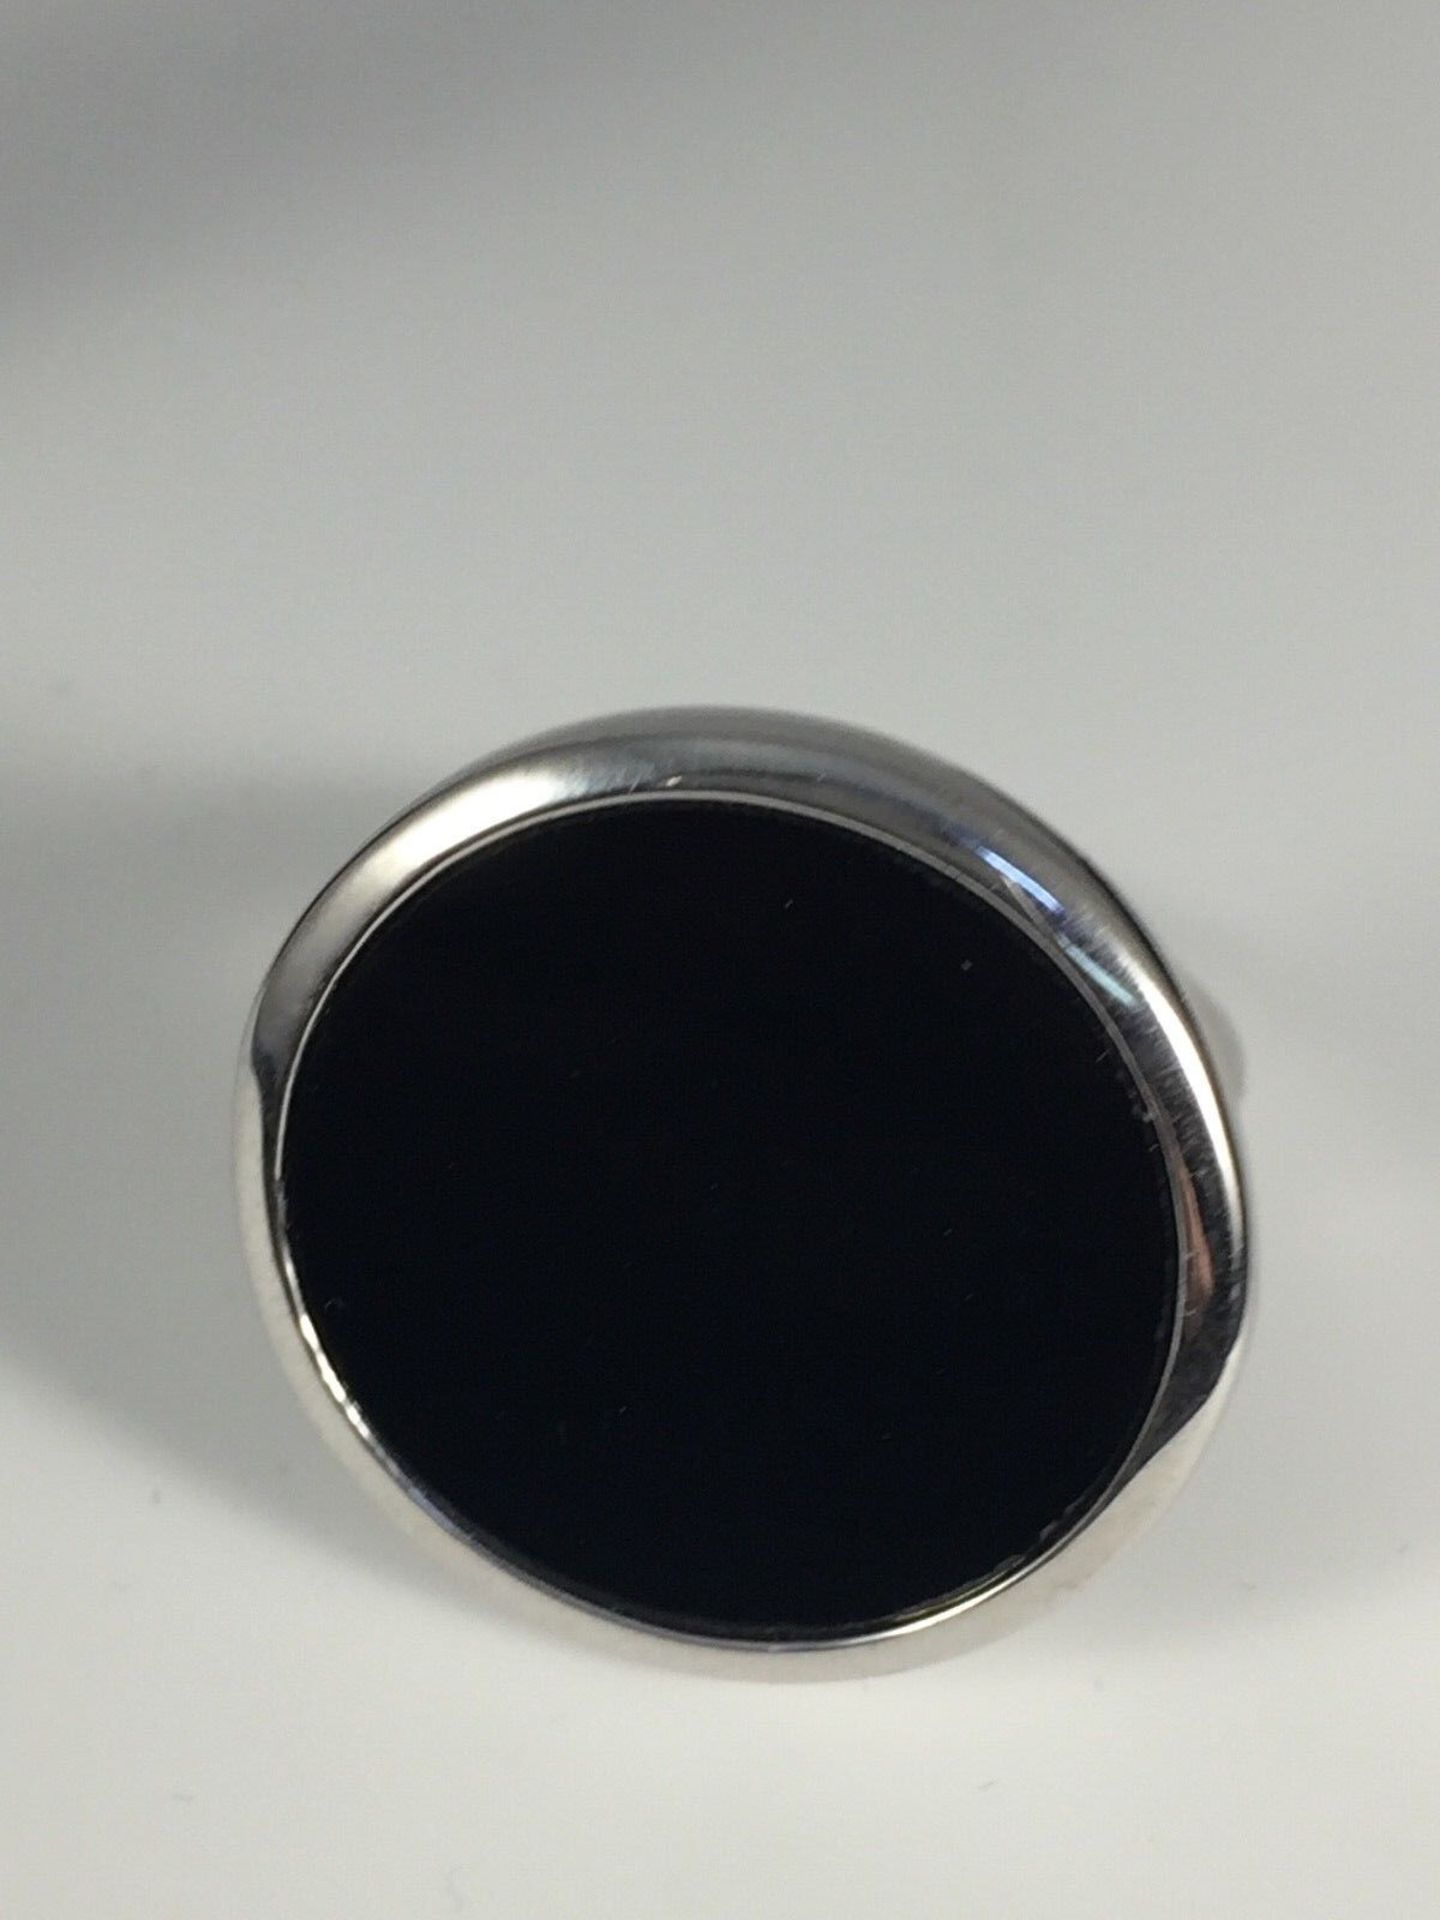 BLACK DISC FASHION RING IN STERLING SILVER - Image 3 of 5